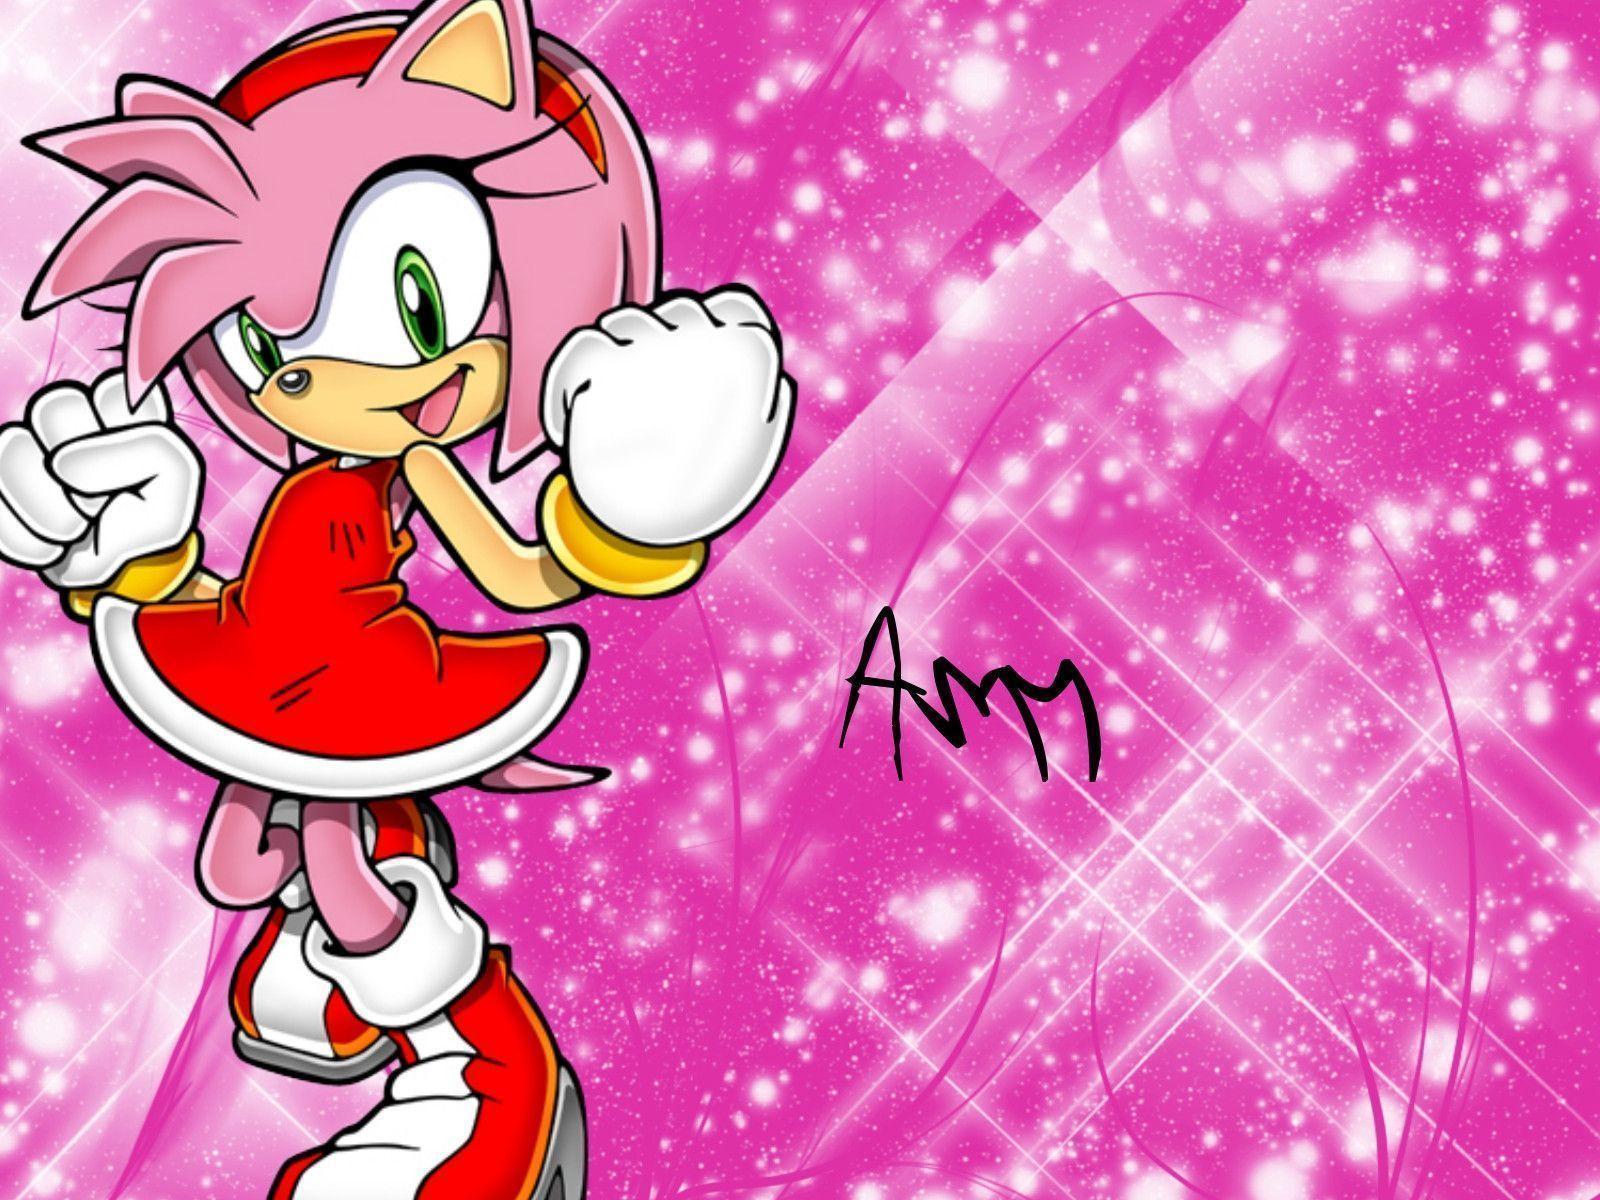 Sonic The Hedgehog Knuckles the Echidna Amy Rose HD Sonic Wallpapers  HD  Wallpapers  ID 48477